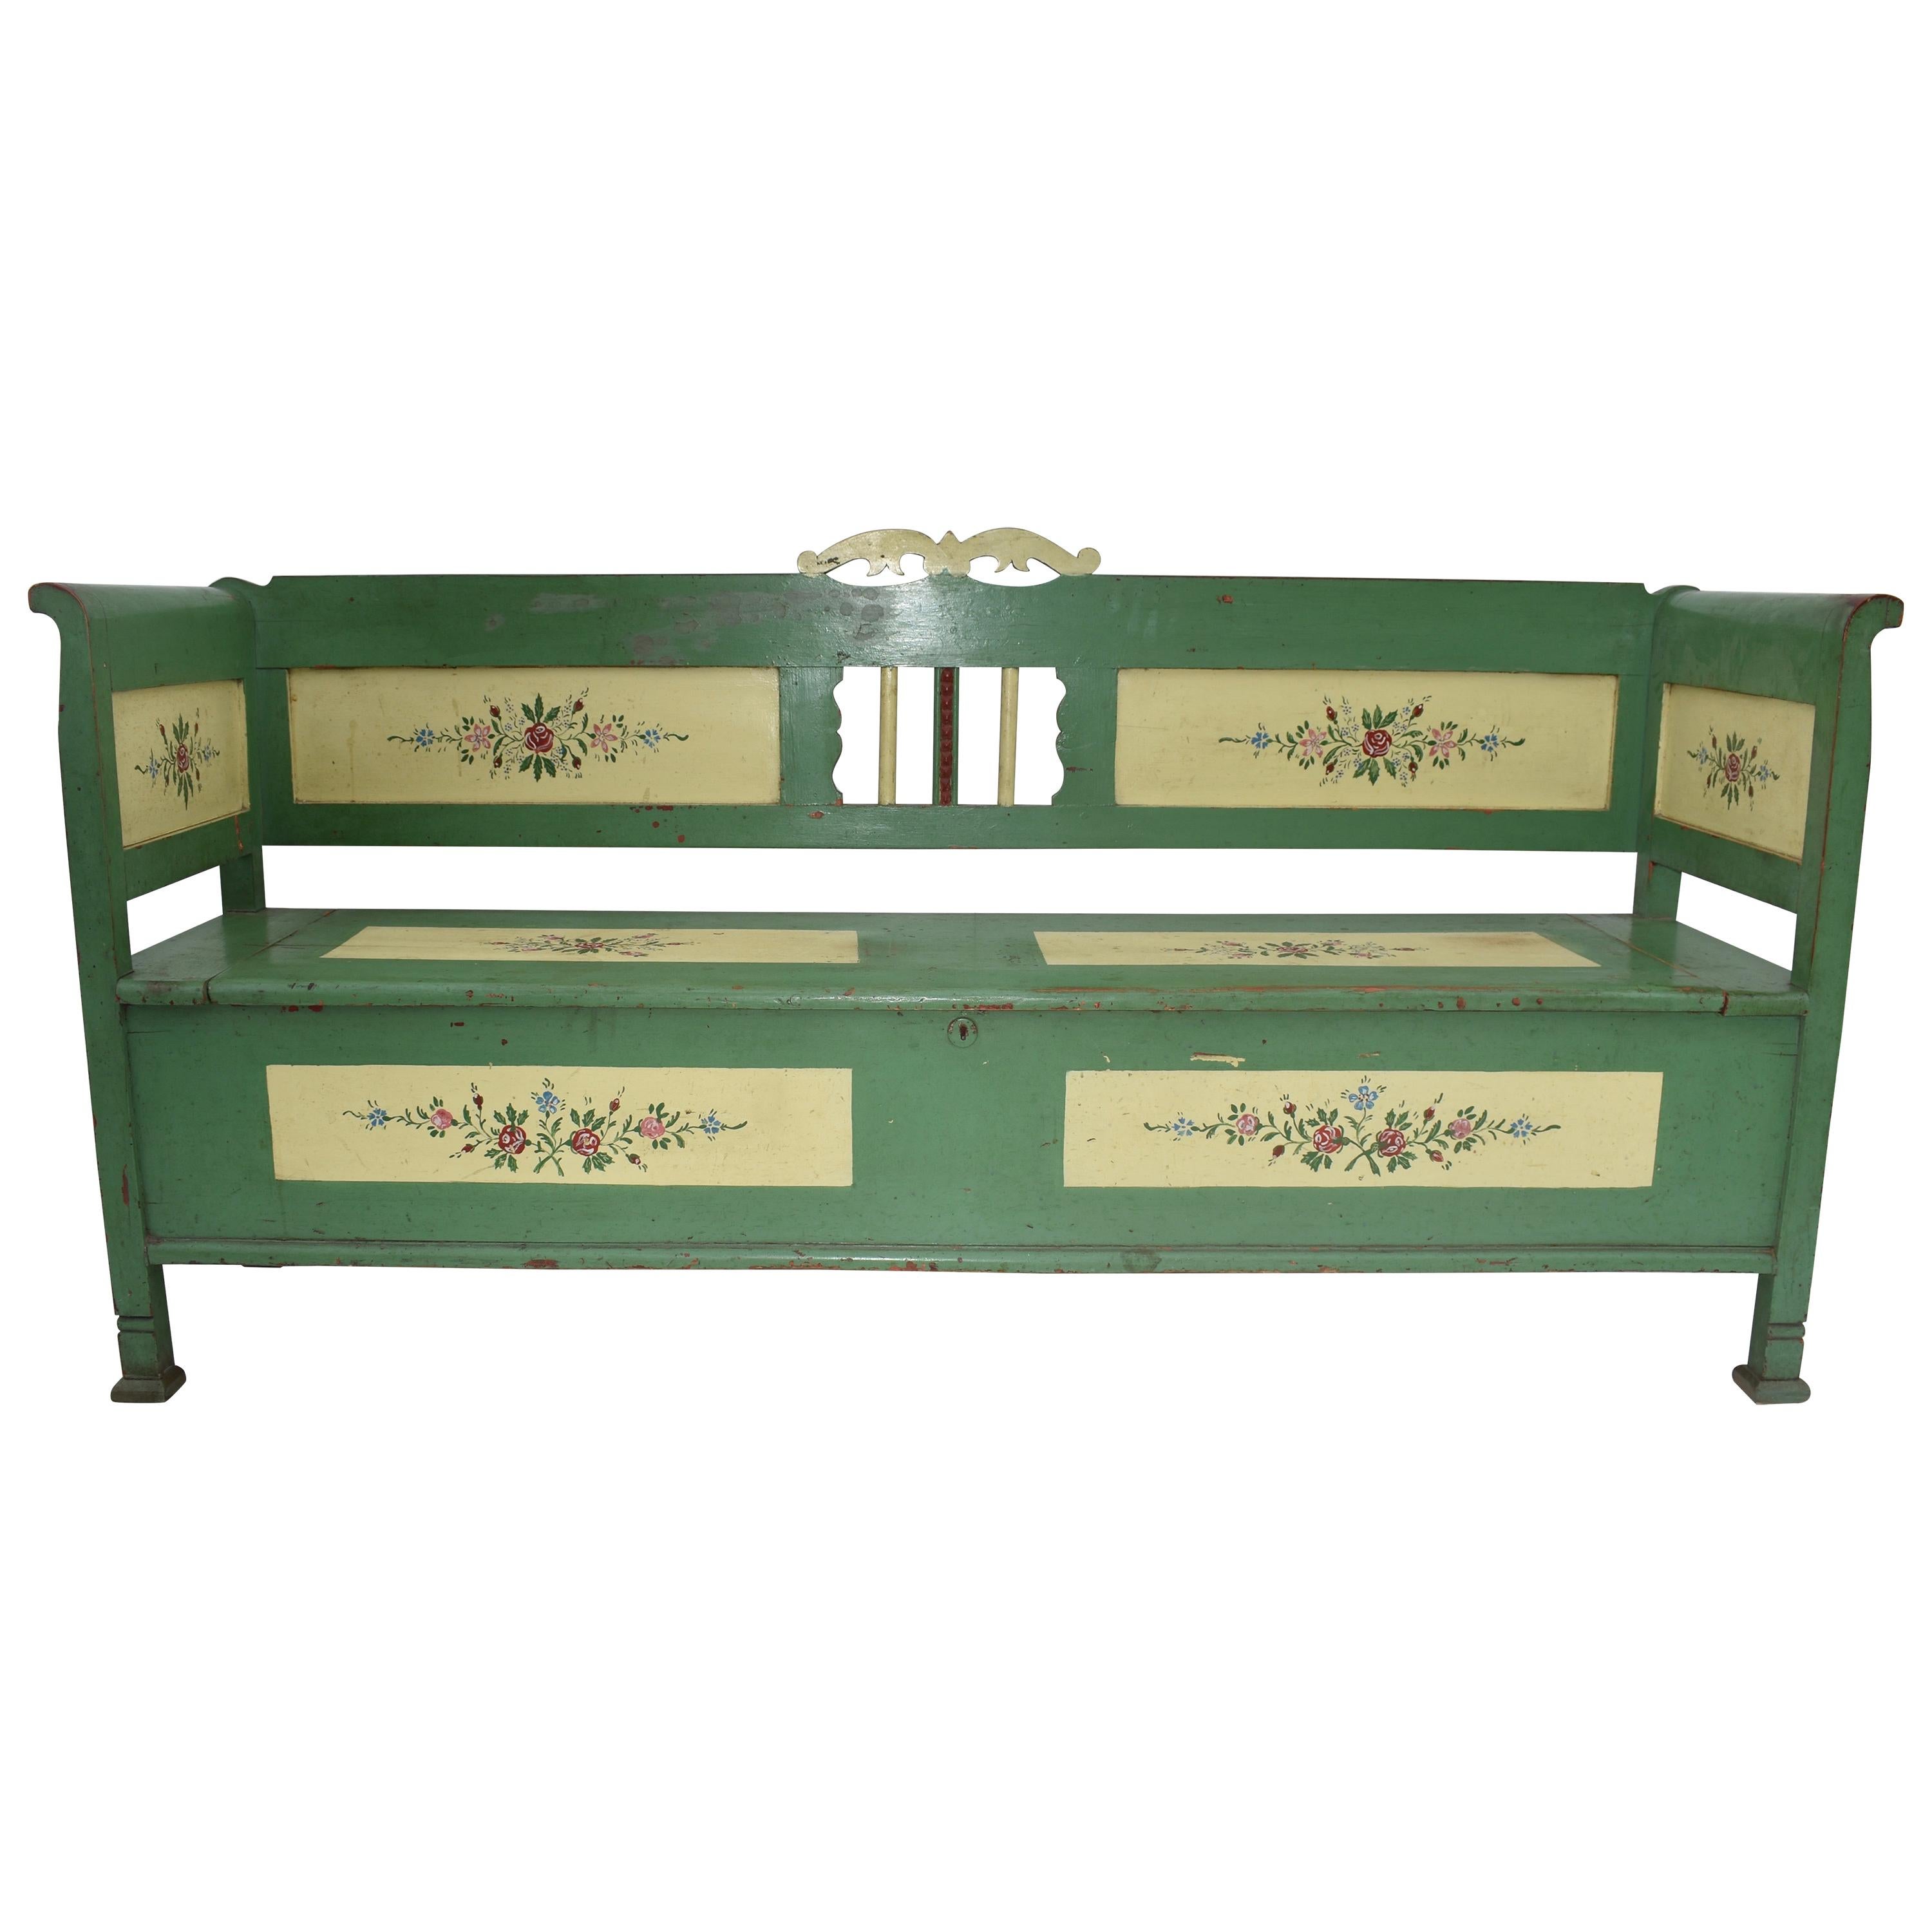 Painted Pine Storage Bench or Settle